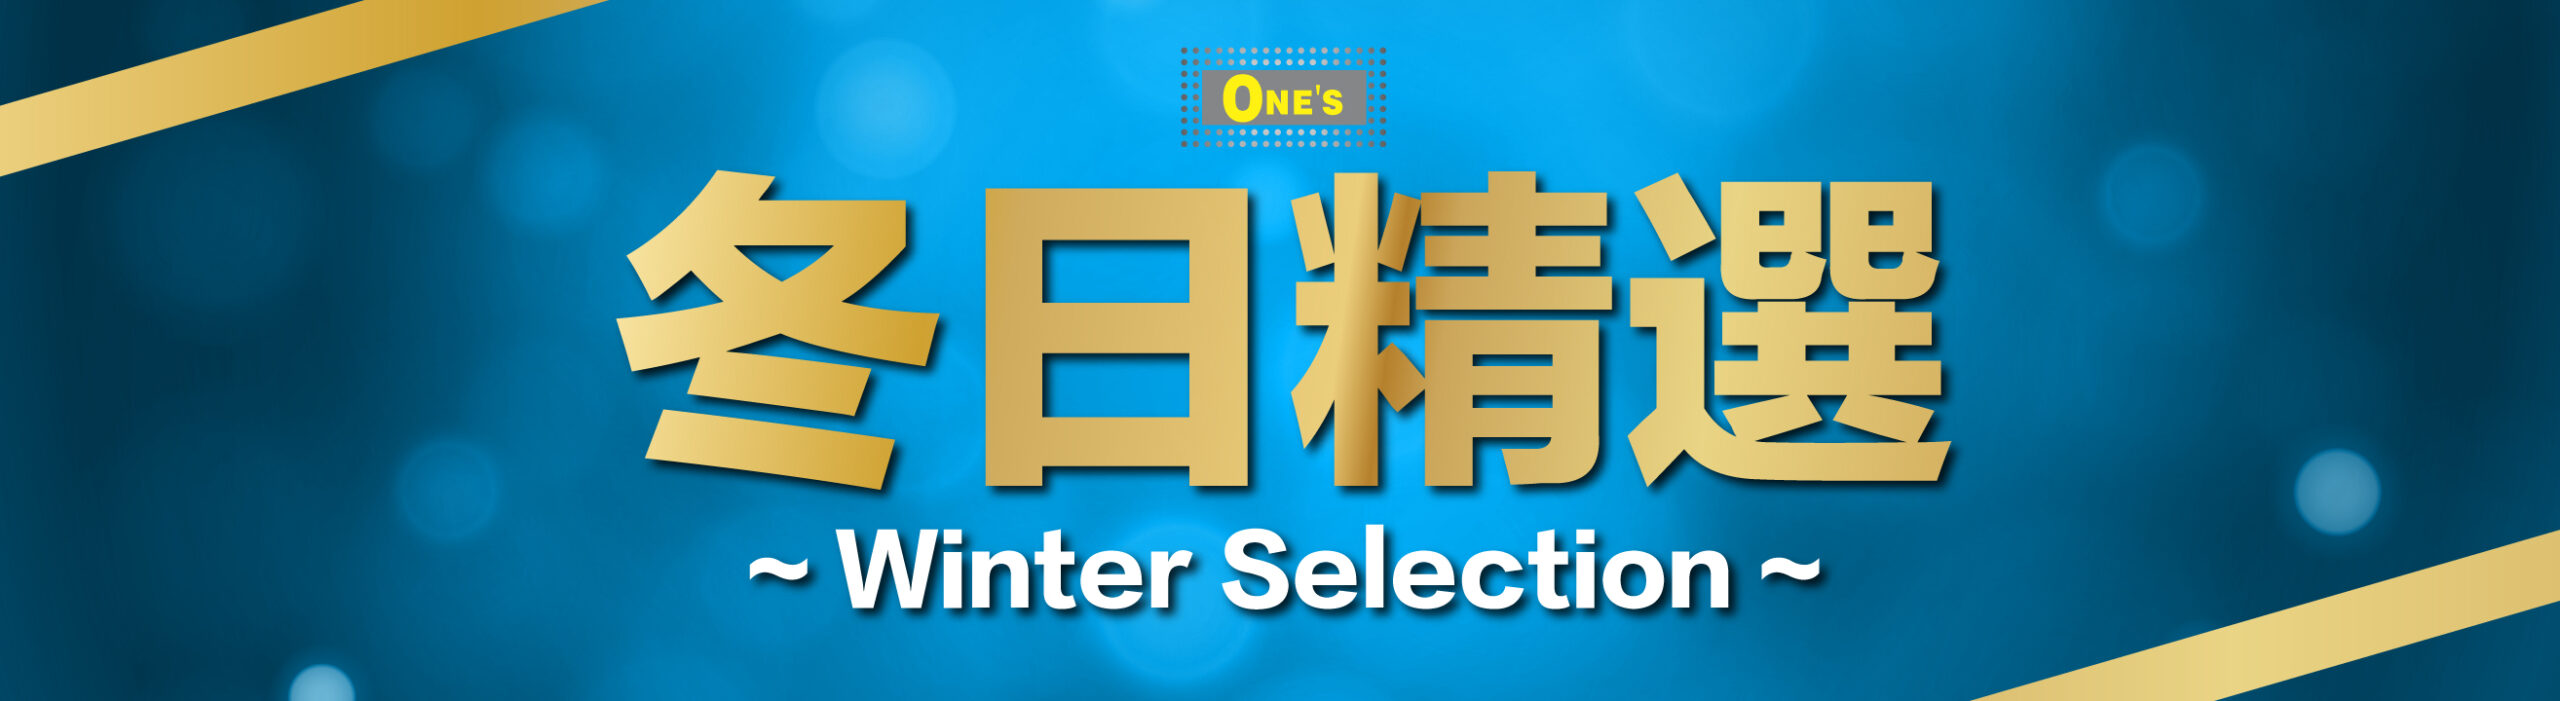 Winter selection banner.